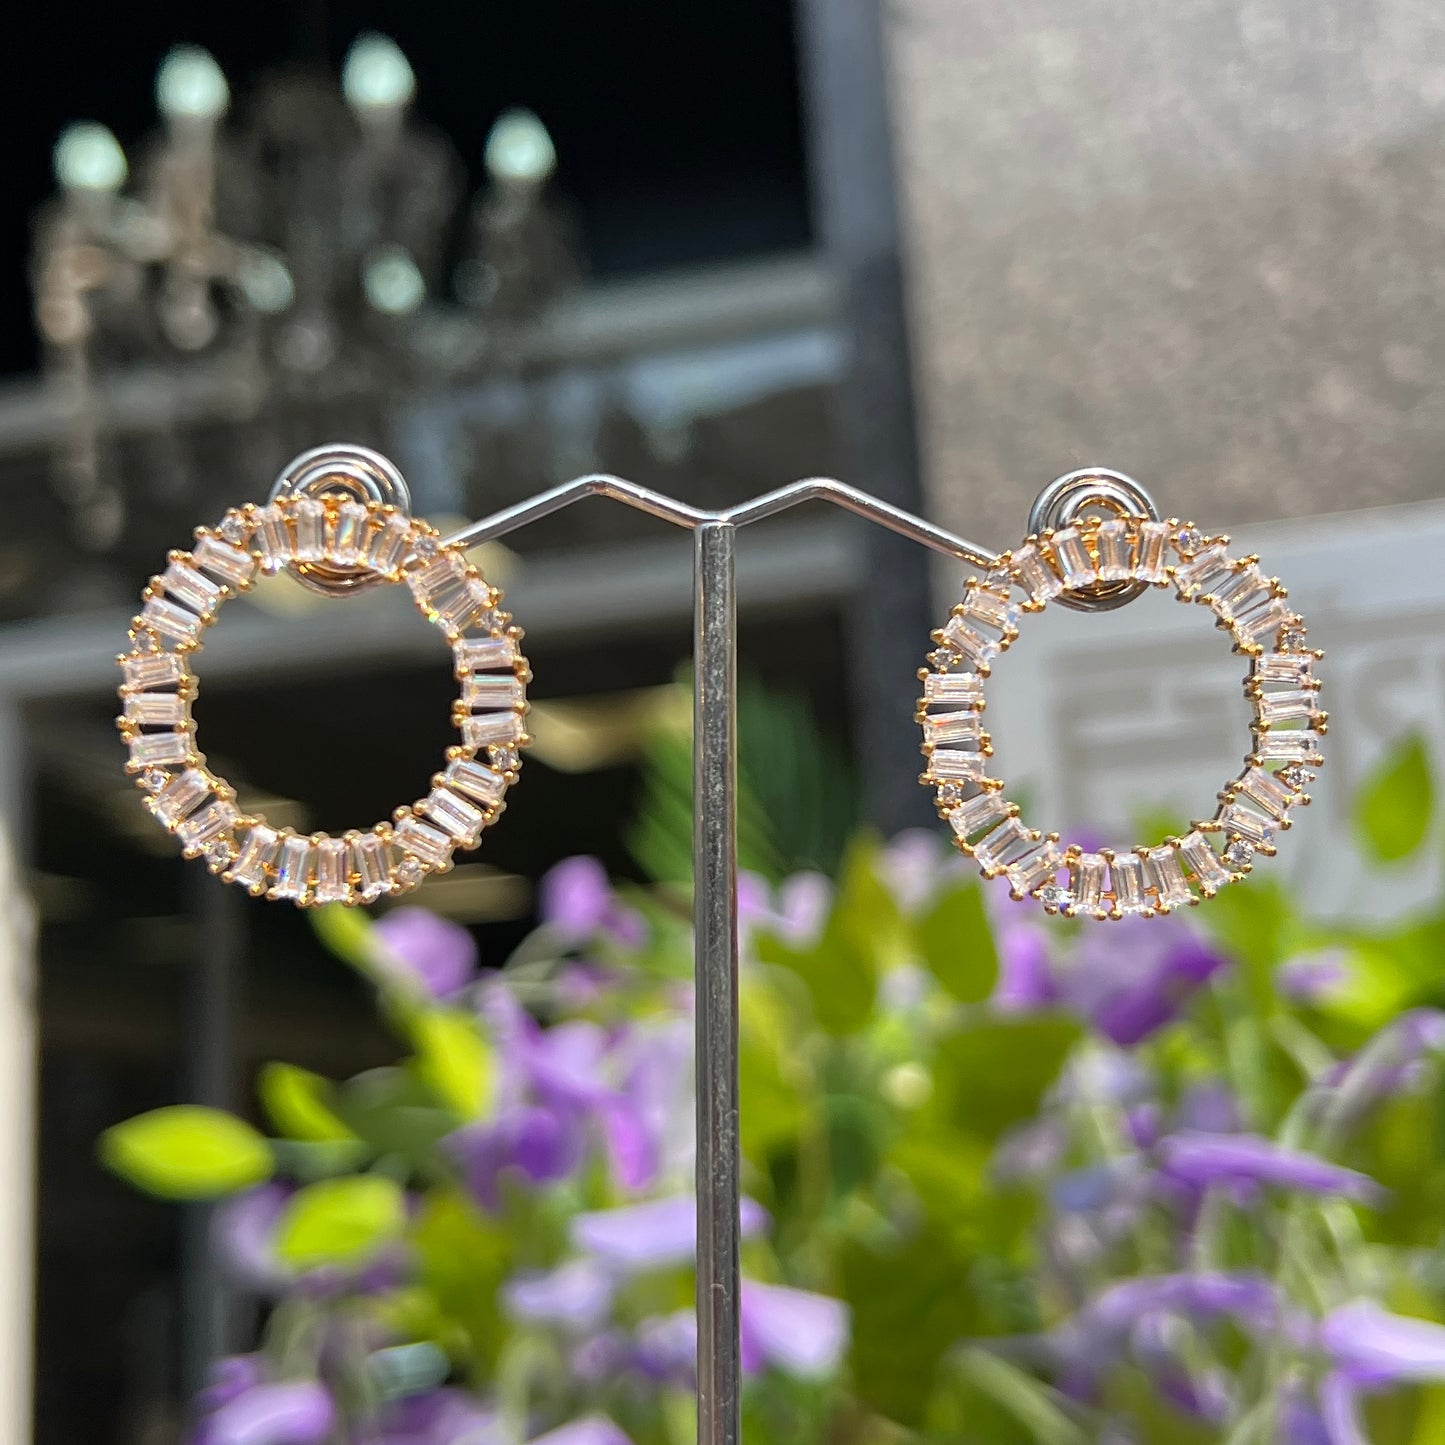 Sif Jakobs Antella Circolo Grande Earrings - 18ct Gold Plated Sterling Silver with White Zirconia